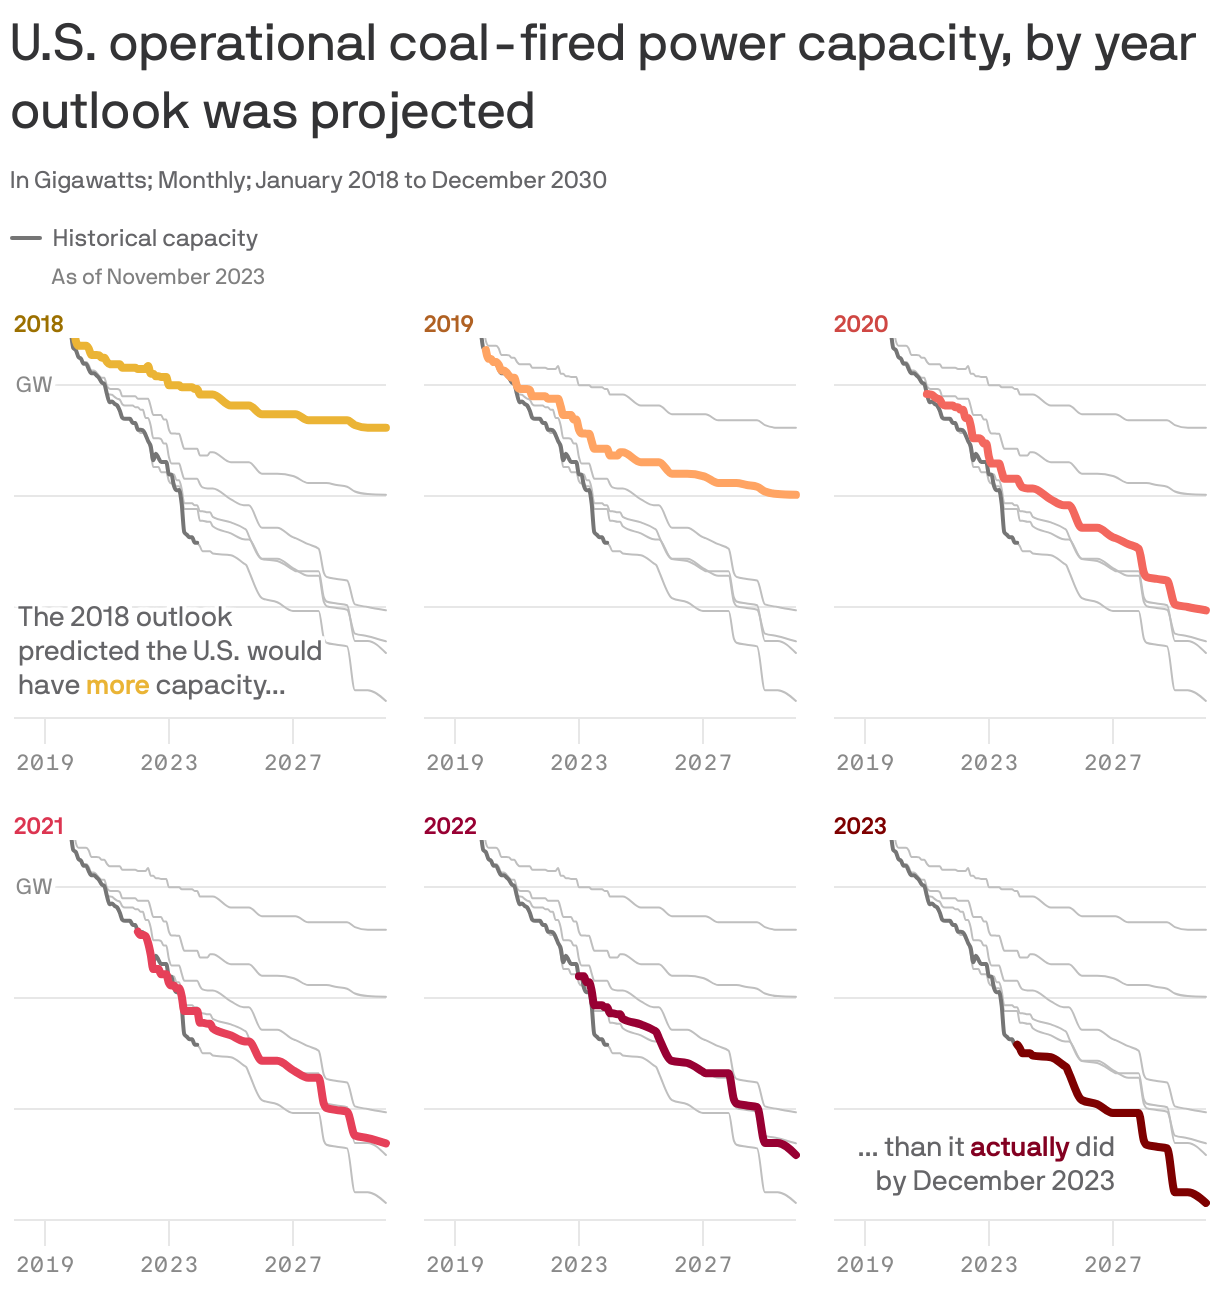 U.S. operational coal-fired power capacity, by year outlook was projected